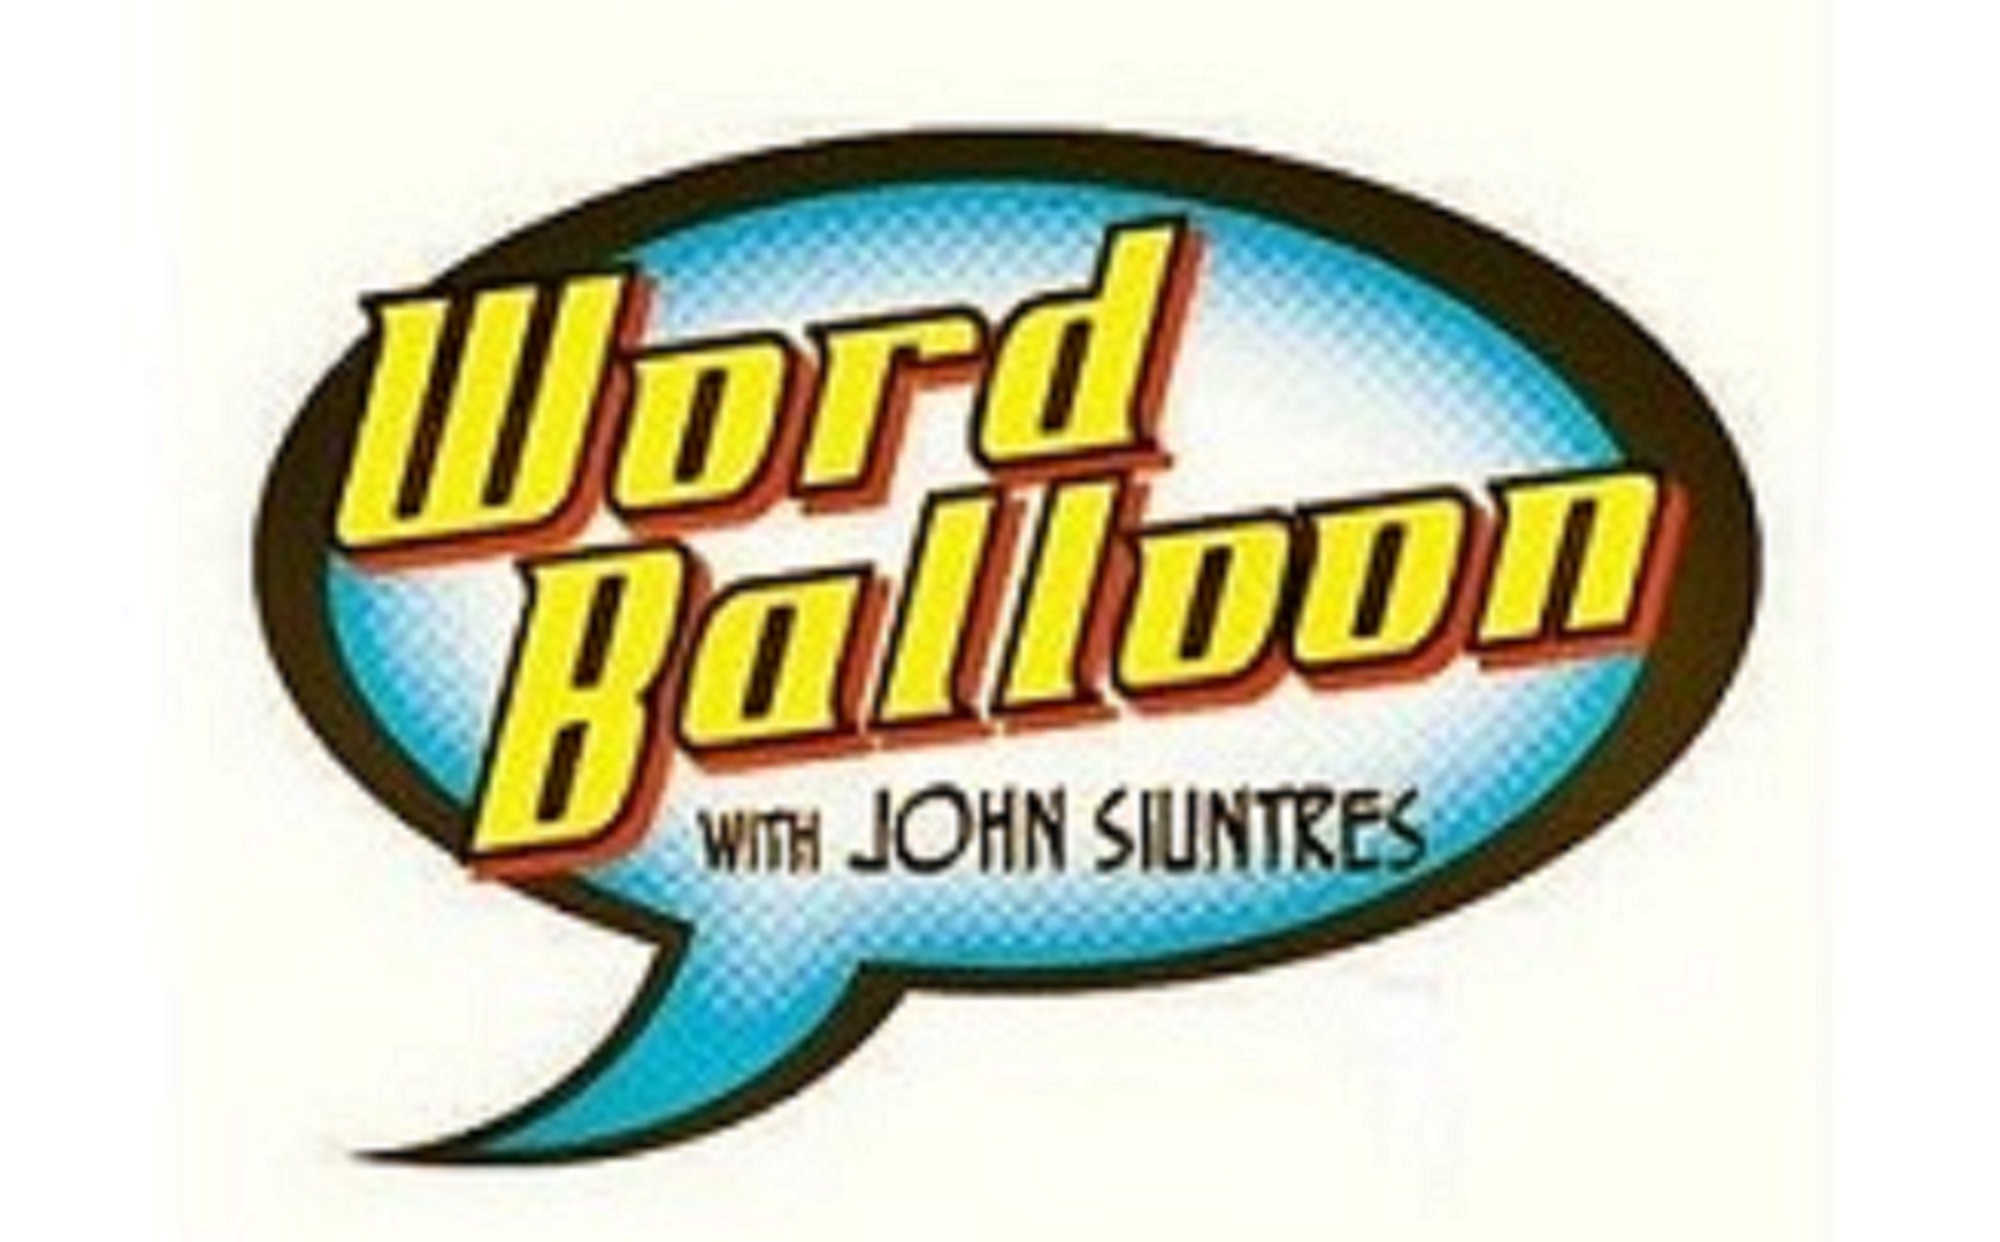 Word Balloon The Pop Culture Interview Podcast: Word Balloon ...